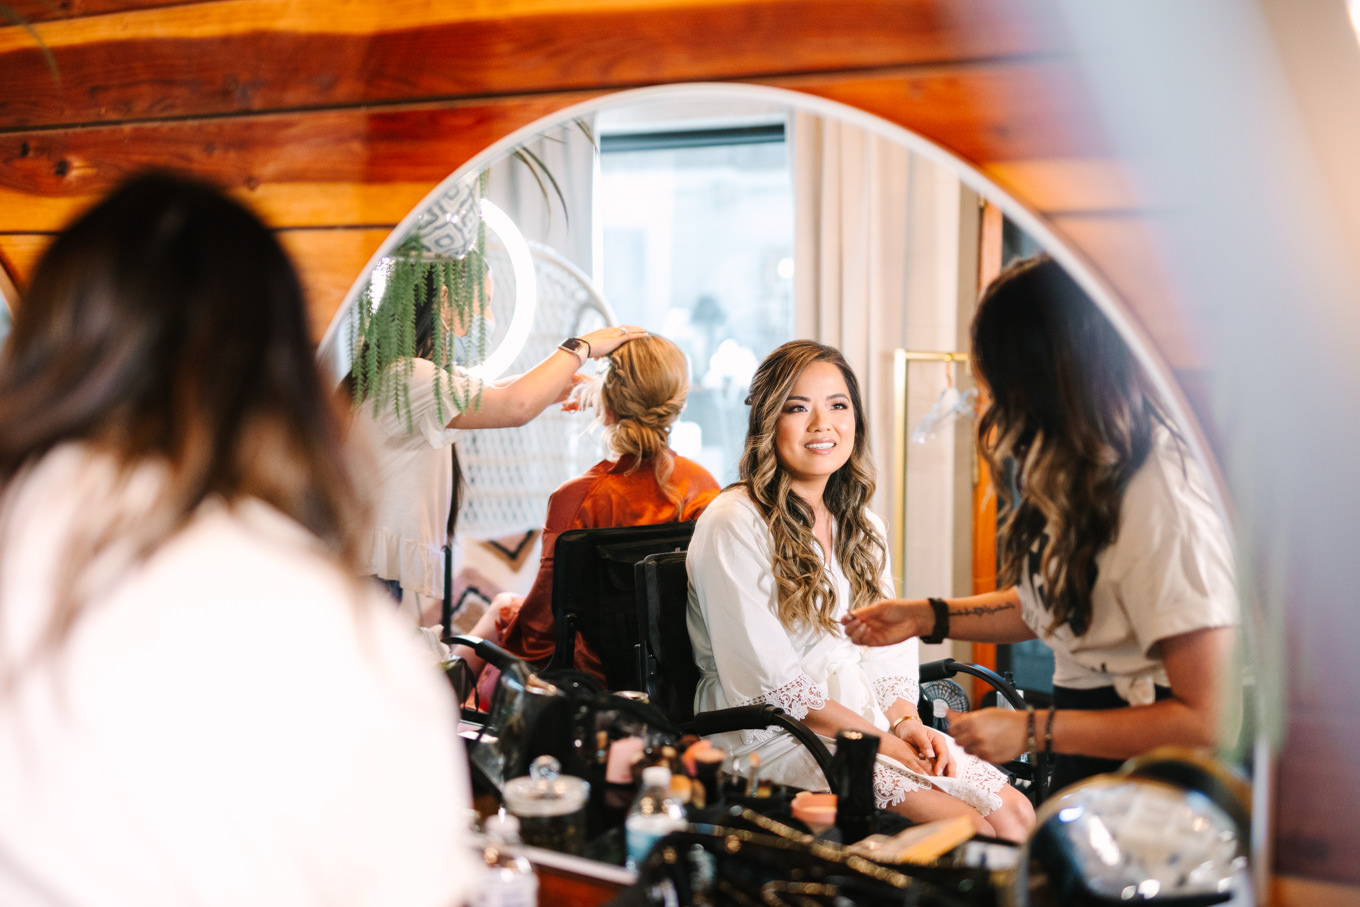 Bride in mirror getting ready | Pink and orange Lautner Compound wedding | Colorful Palm Springs wedding photography | #palmspringsphotographer #palmspringswedding #lautnercompound #southerncaliforniawedding  Source: Mary Costa Photography | Los Angeles